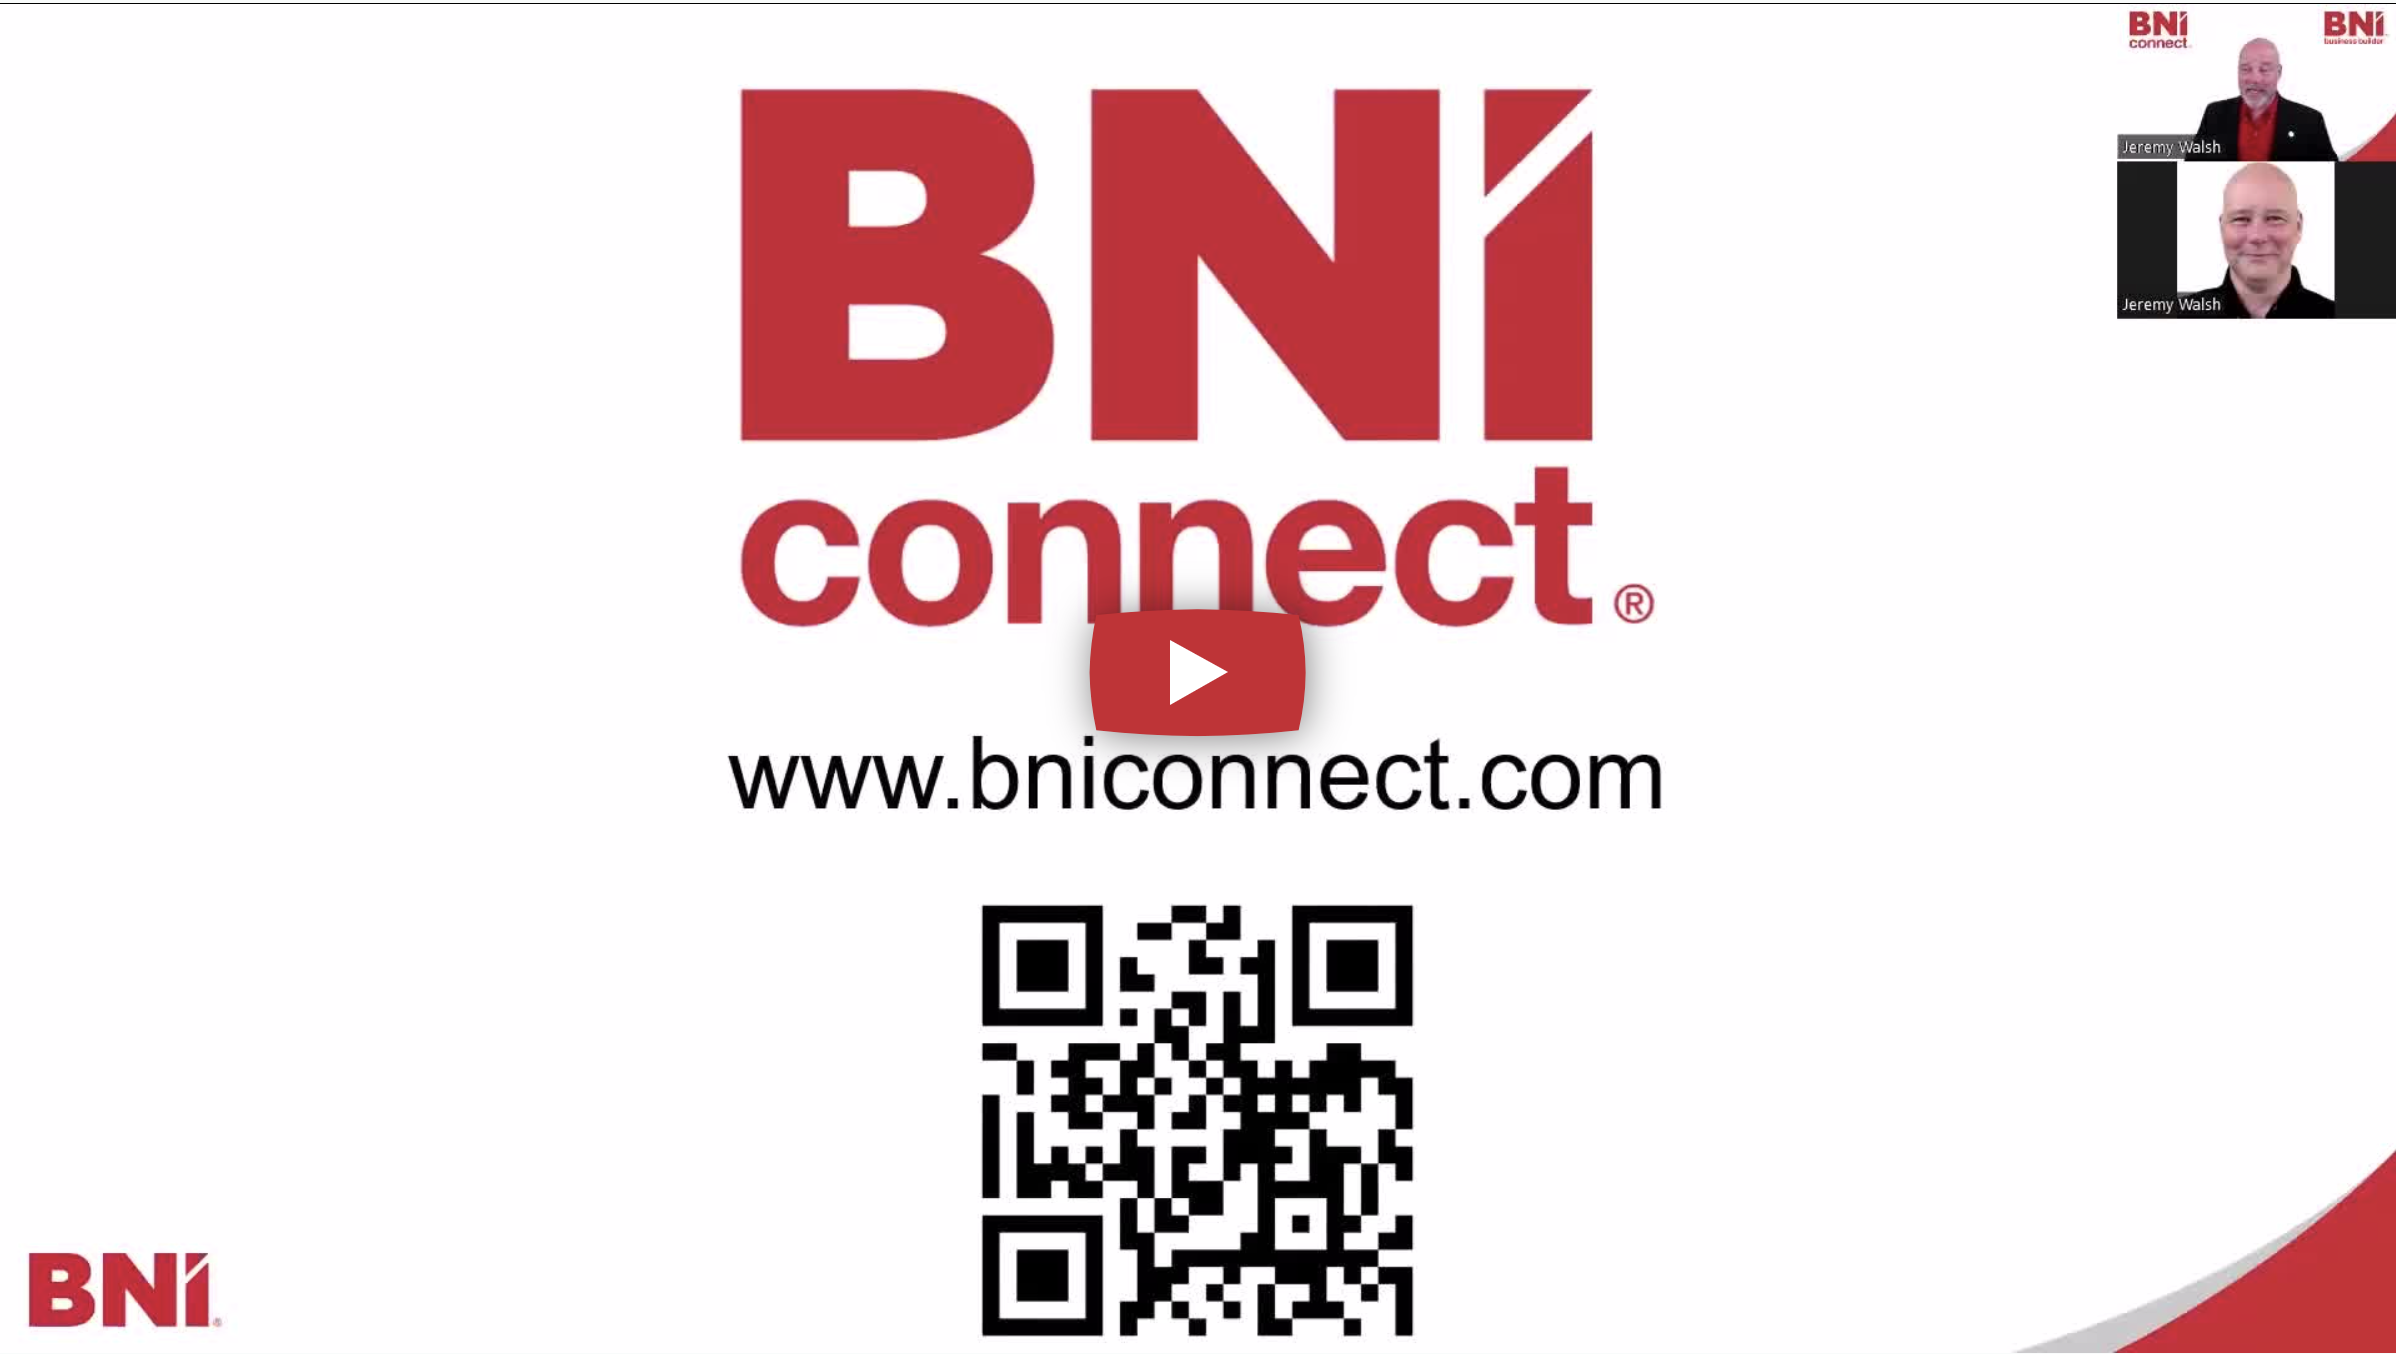 Getting logged in to BNI Connect and BNI Business Builder